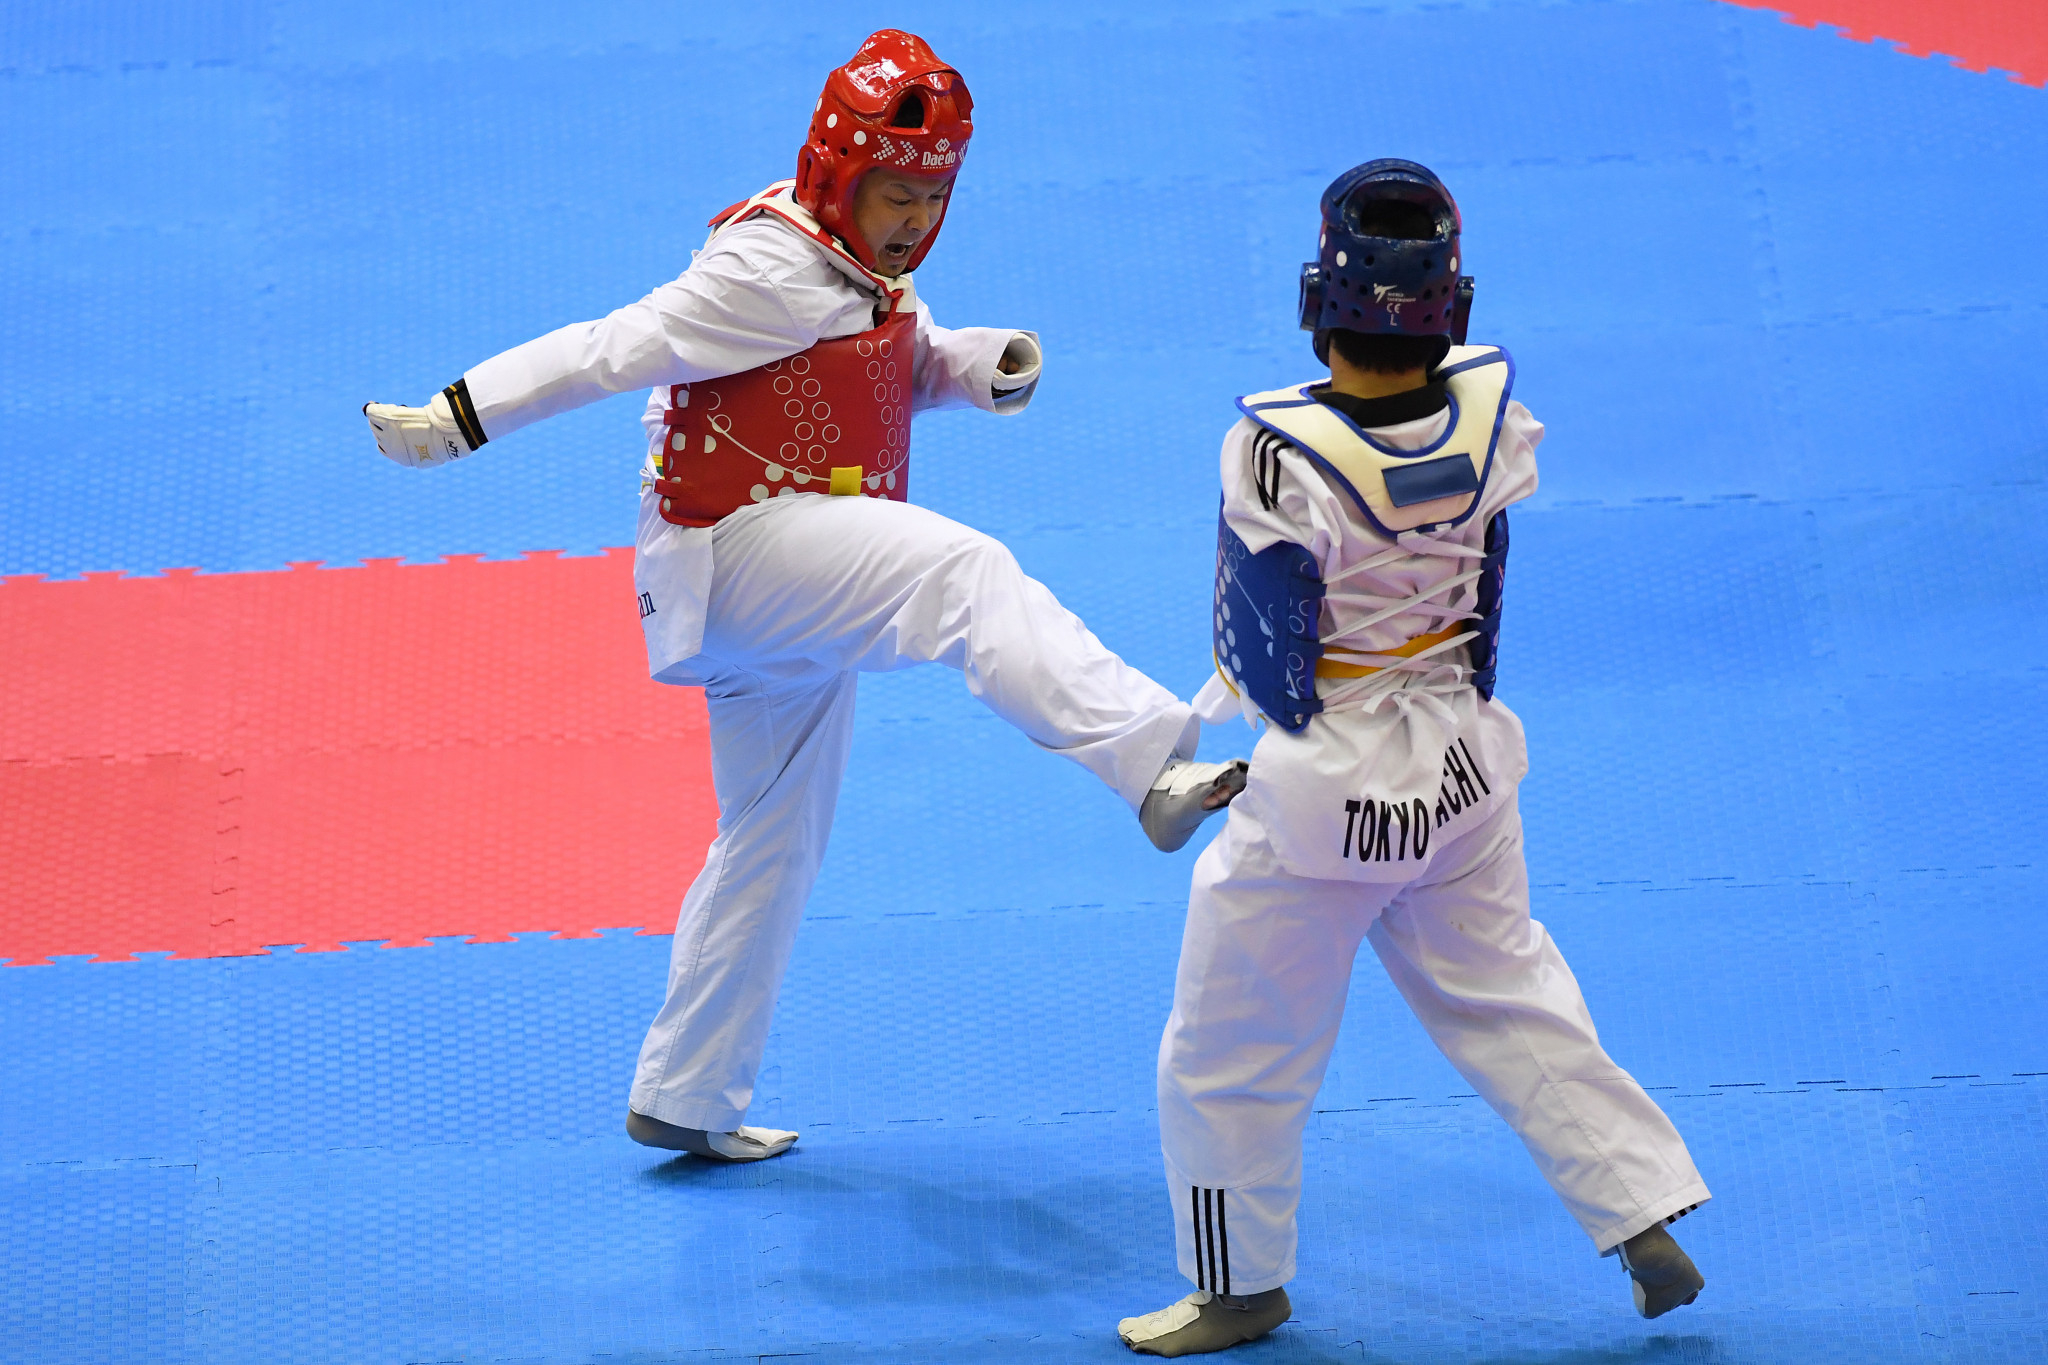 Taekwondo is due to make its Paralympic debut next year ©Getty Images